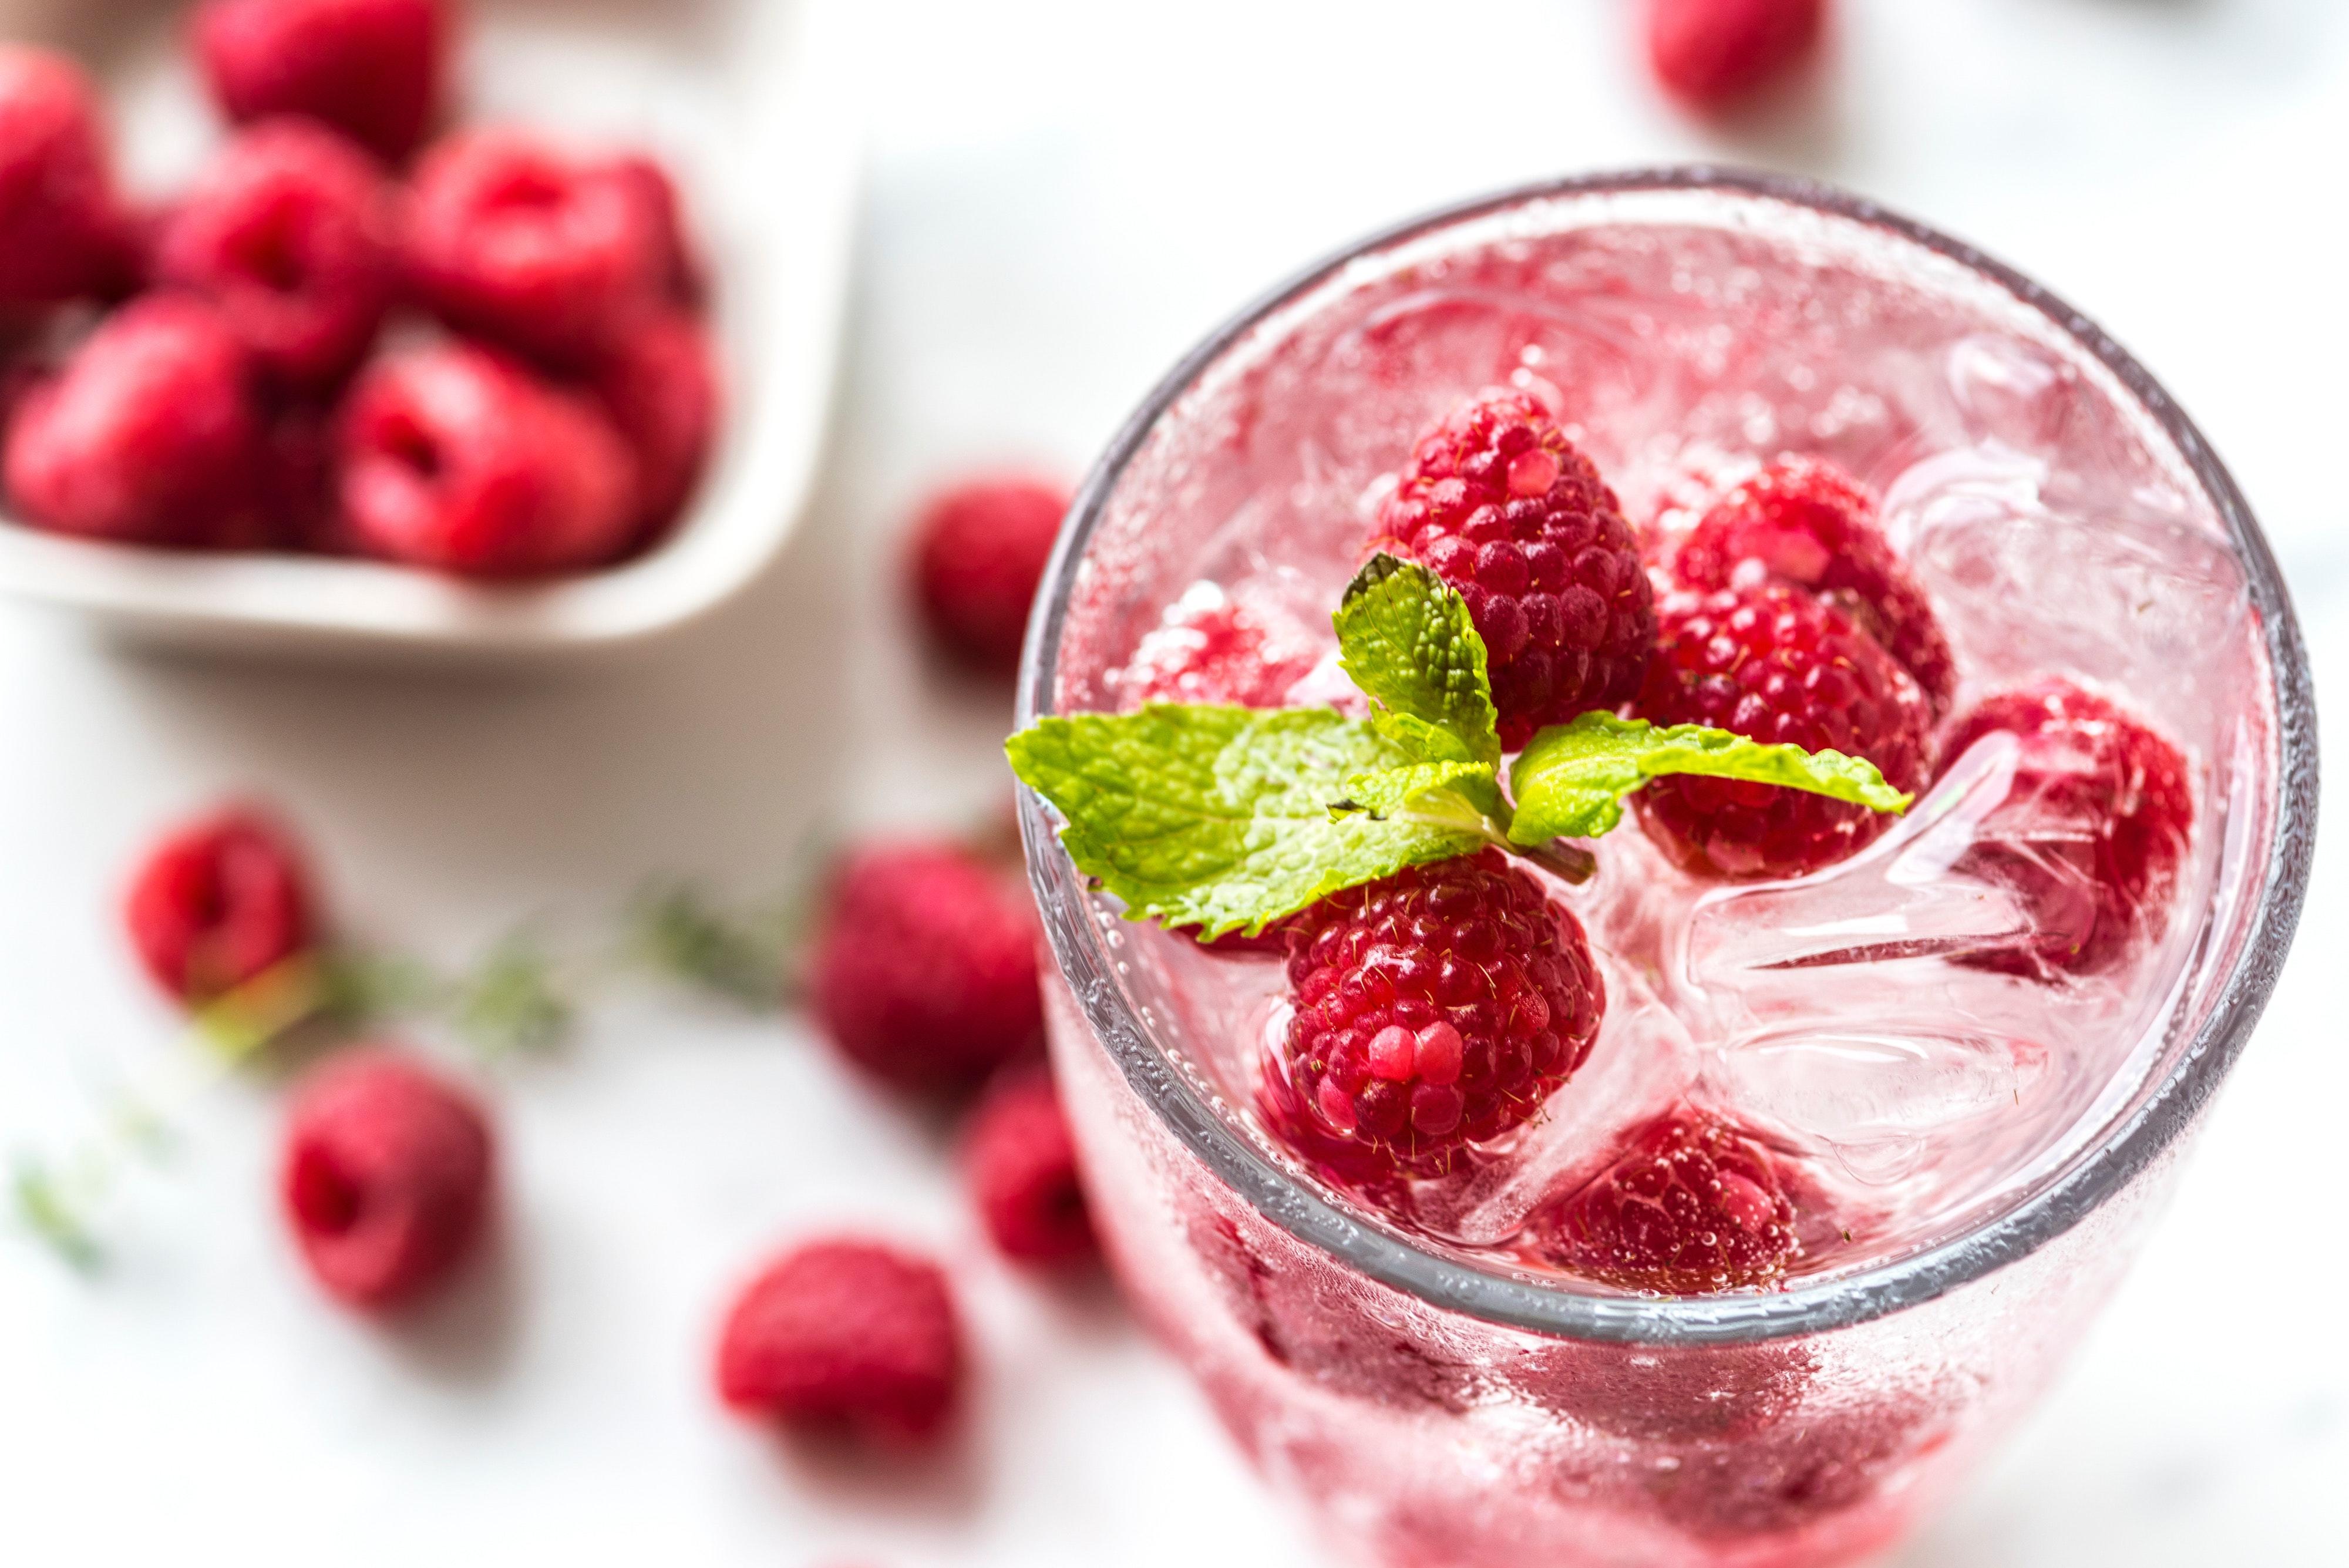 Raspberry Lemonade : you can actually smell the FIZZ, Best seller.